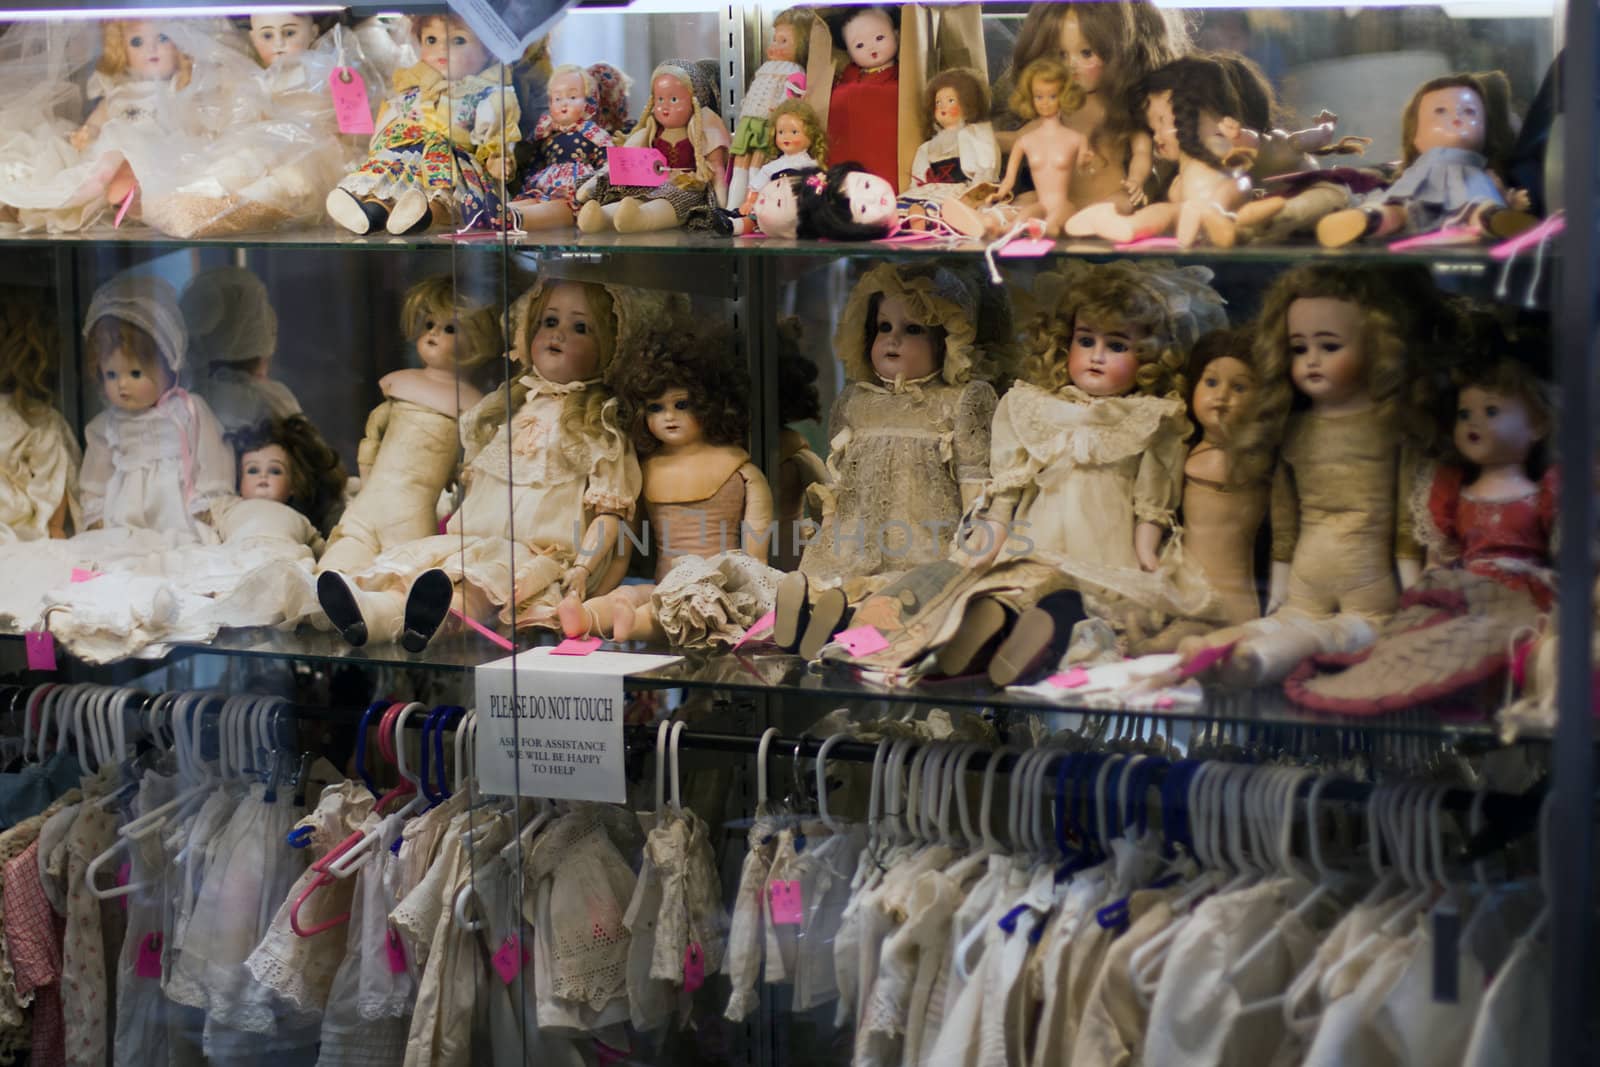 Showcase full with antique dolls and clothes